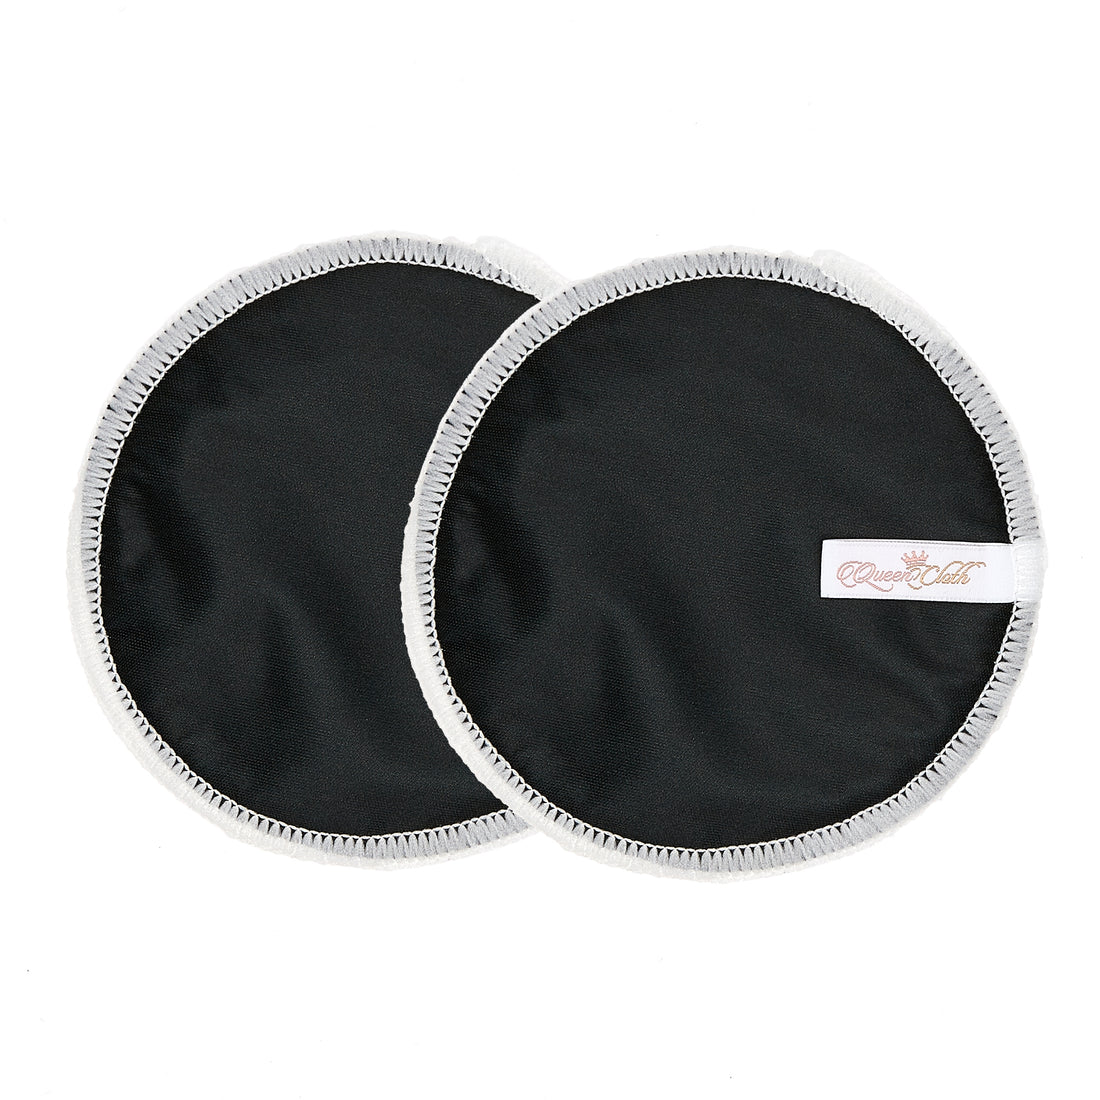 Queen Cloth Breast Pads - Black